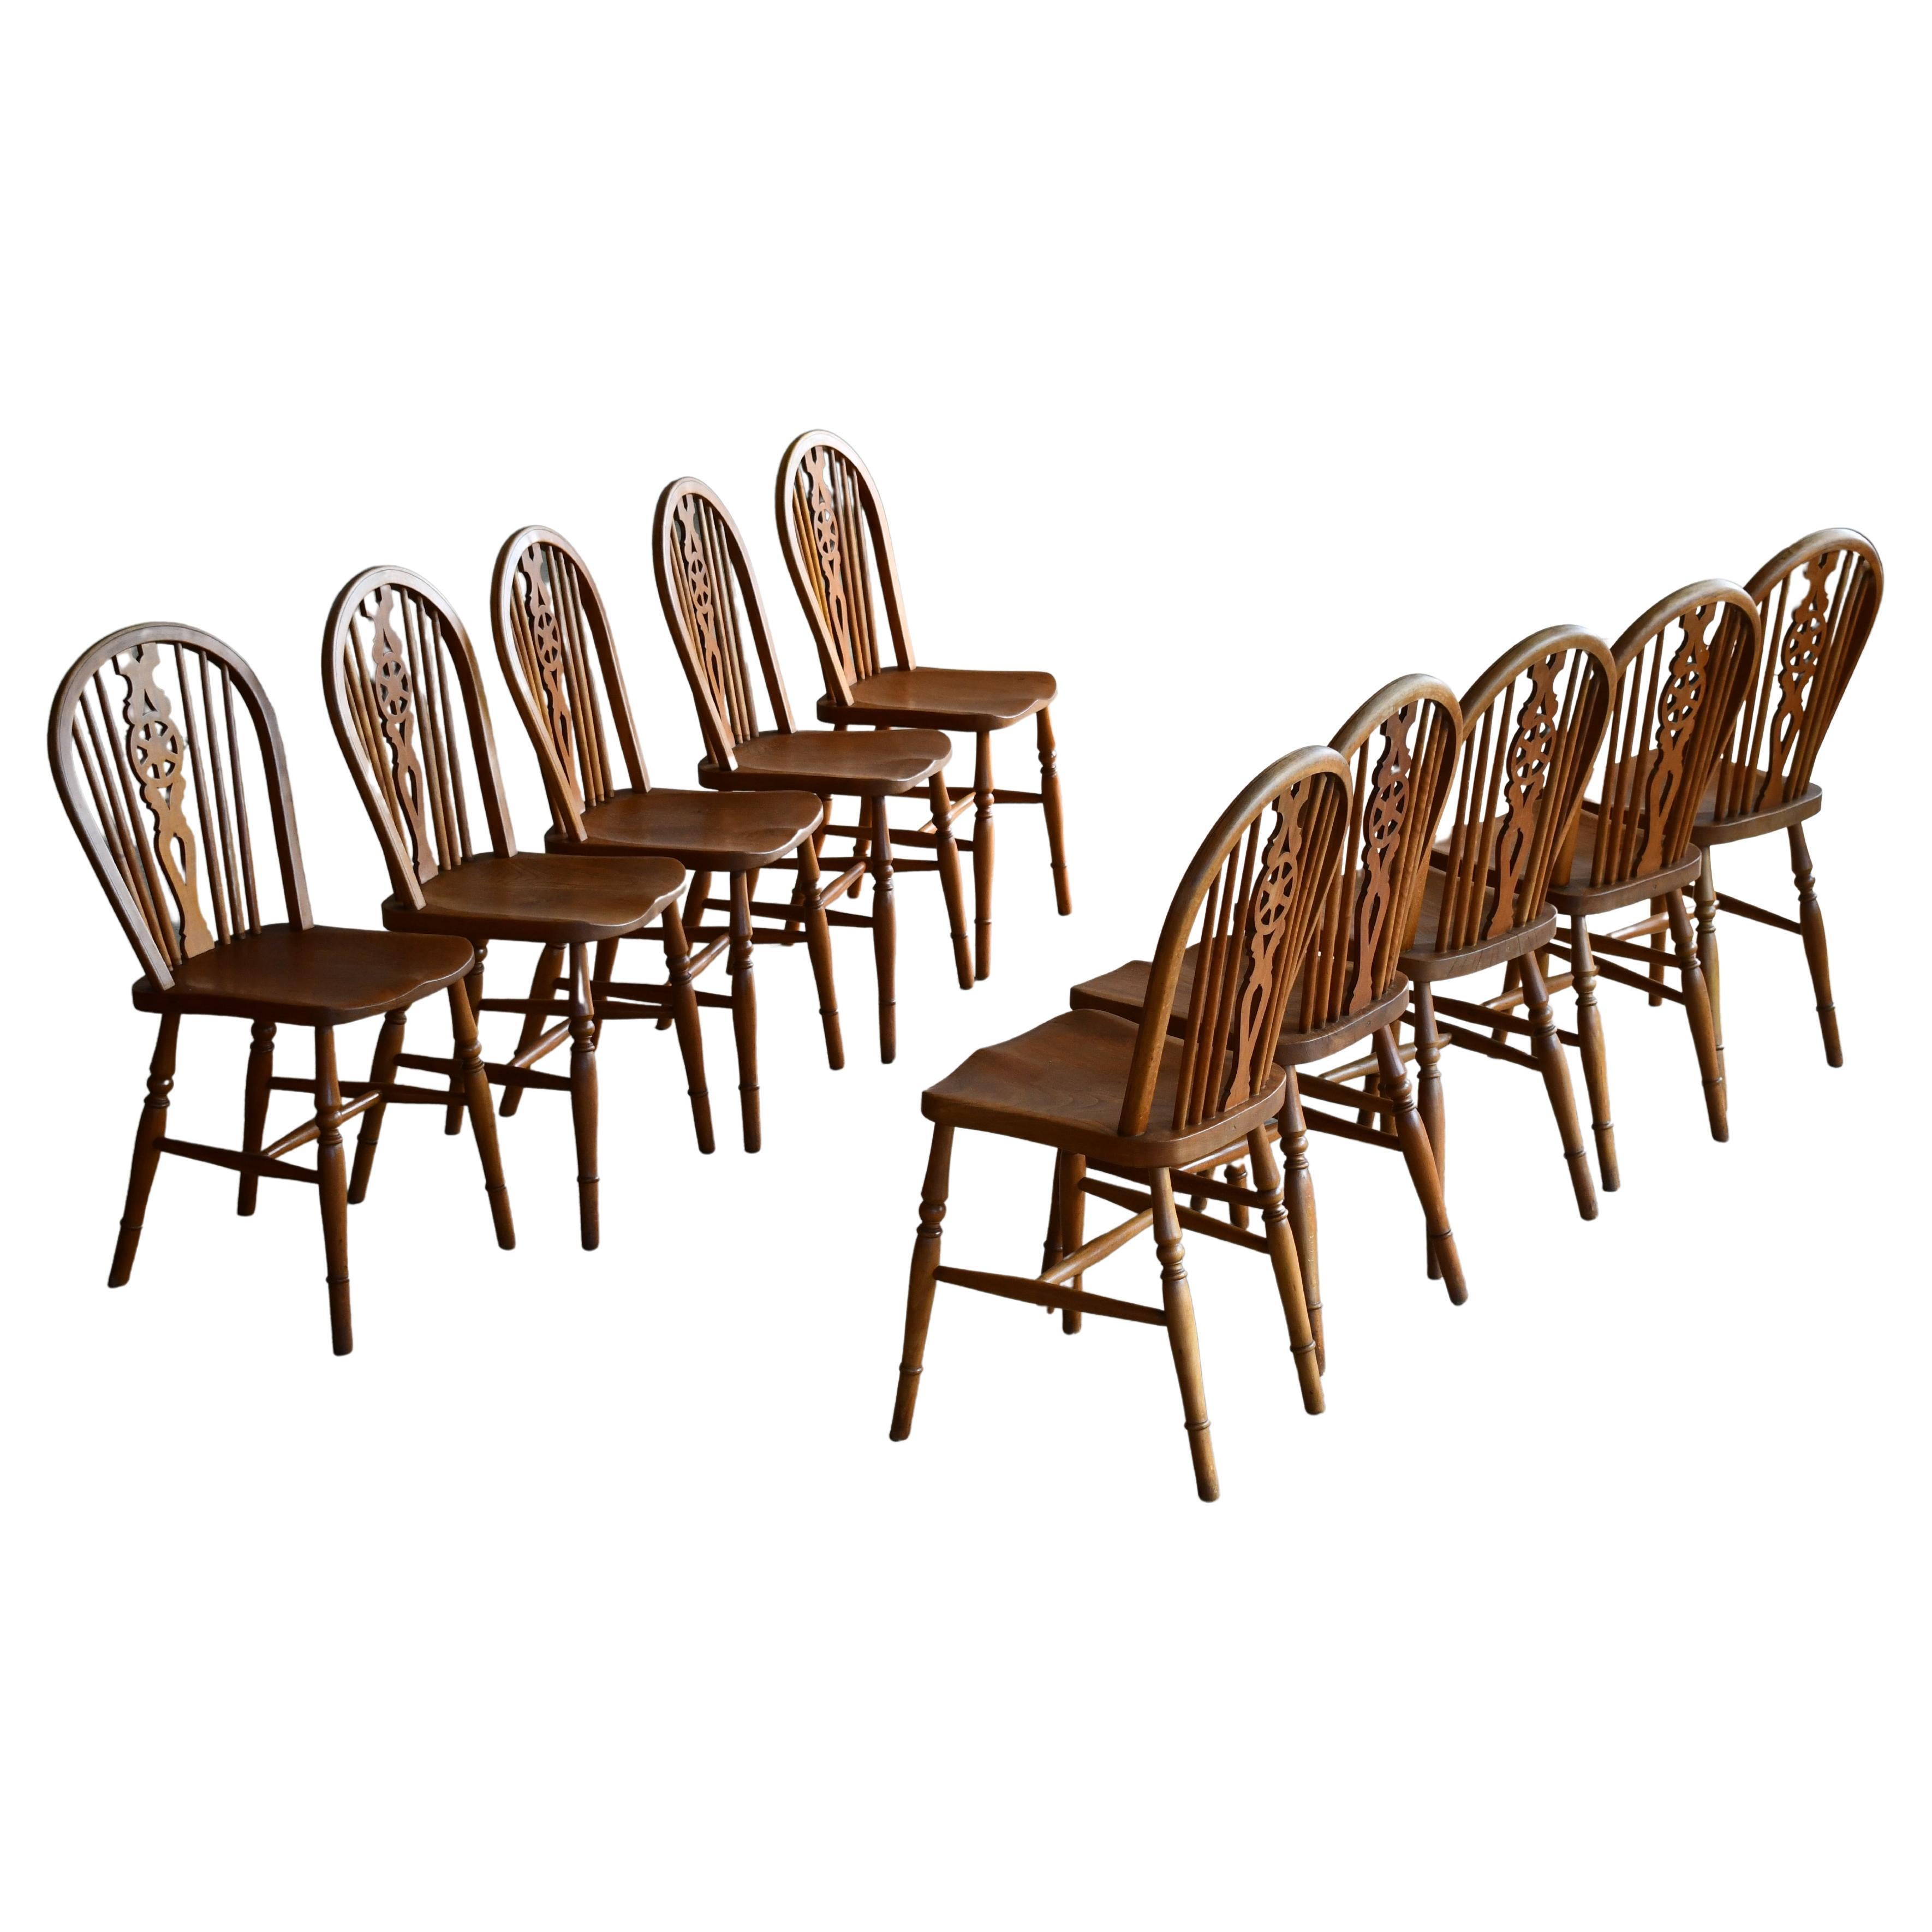 Set of Ten Danish Windsor Style Dining Chairs, Early to Mid-1900s For Sale